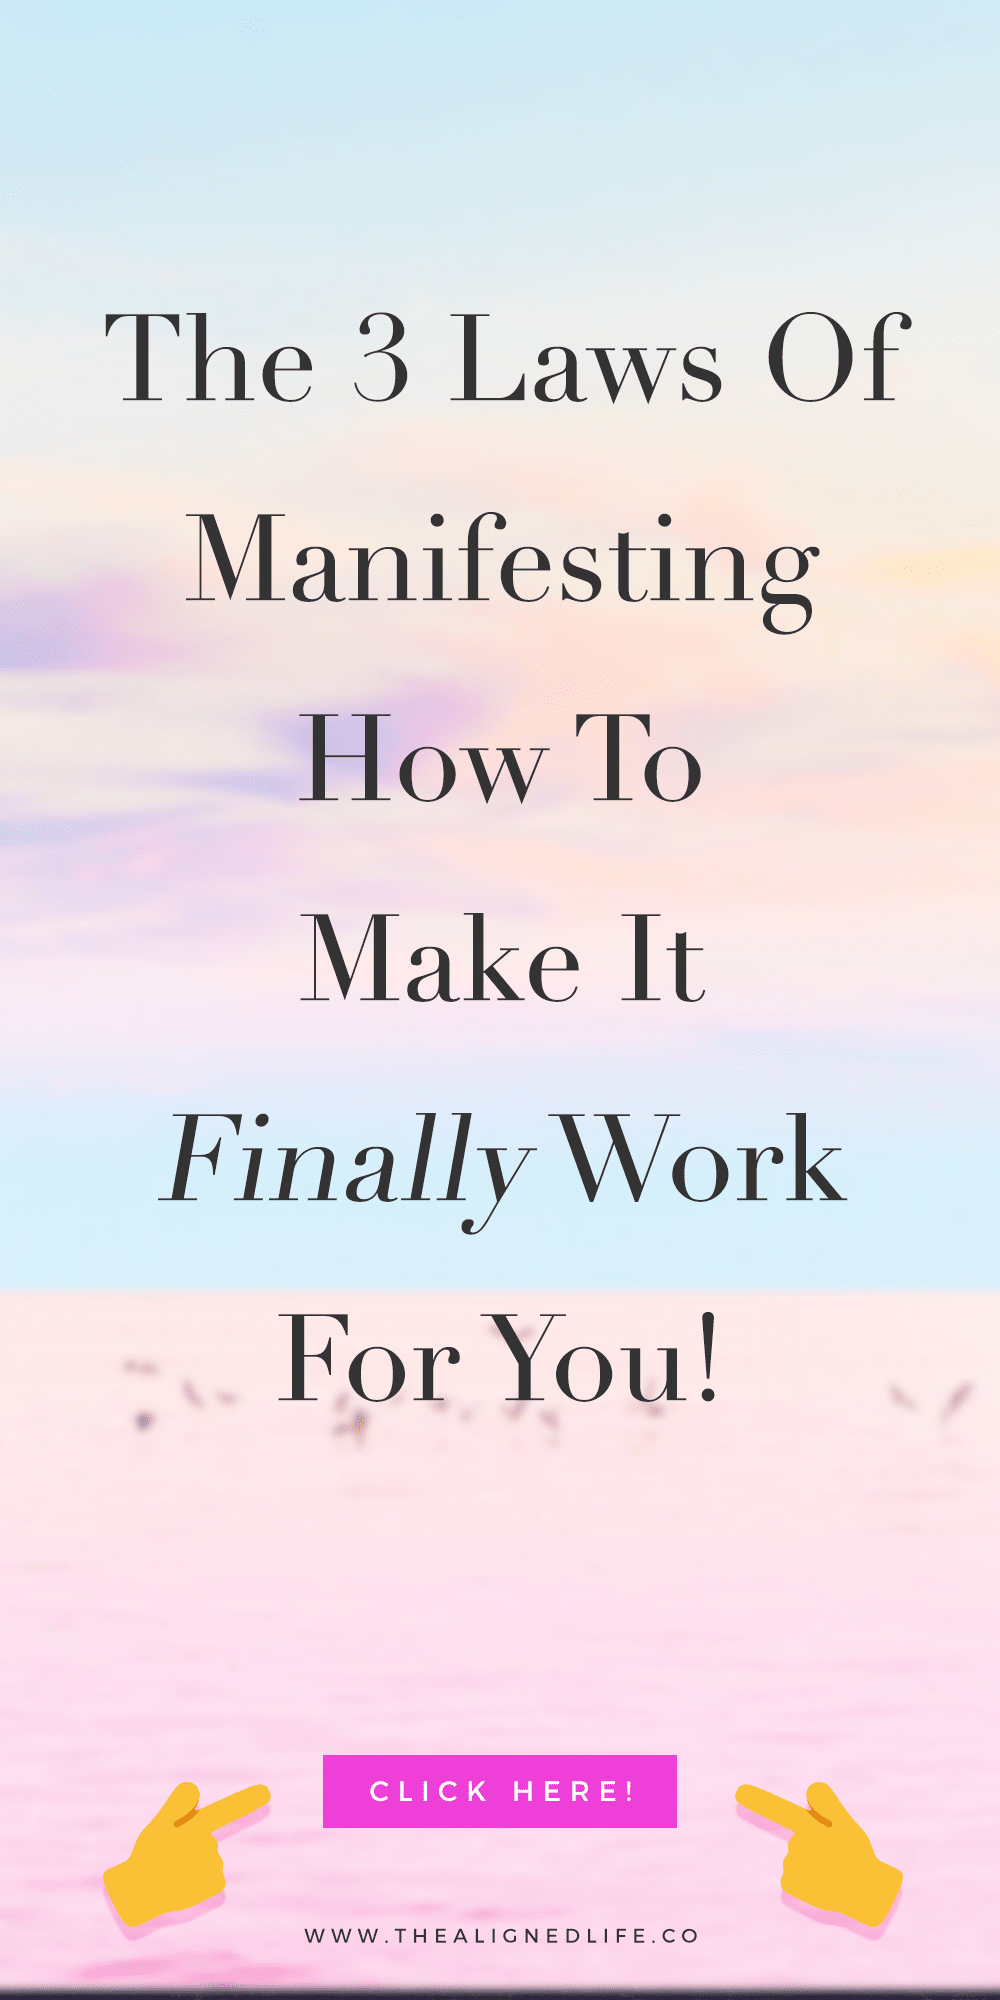 The 3 Laws Of Manifesting - How You Can Finally Make It Work For You!